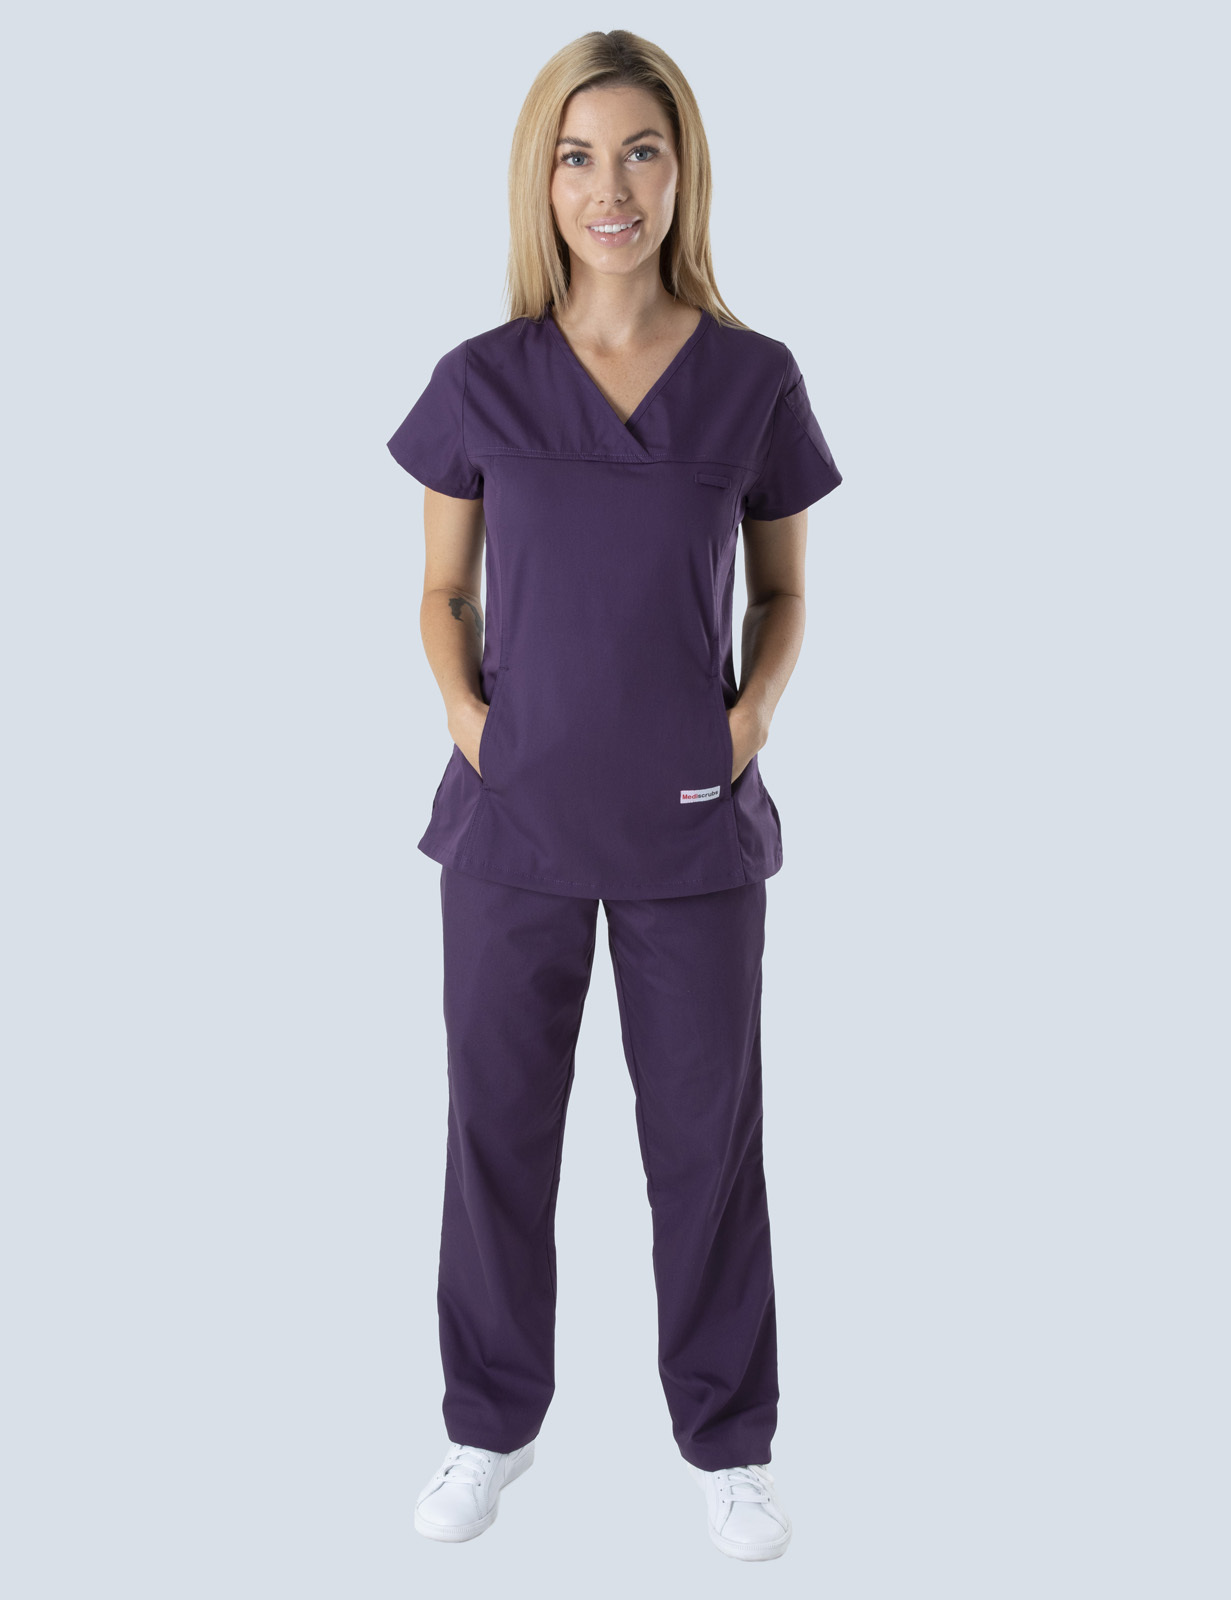 Caboolture Hospital - ED EN (Women's Fit Solid Scrub Top and Cargo Pants in Aubergine incl Logos)